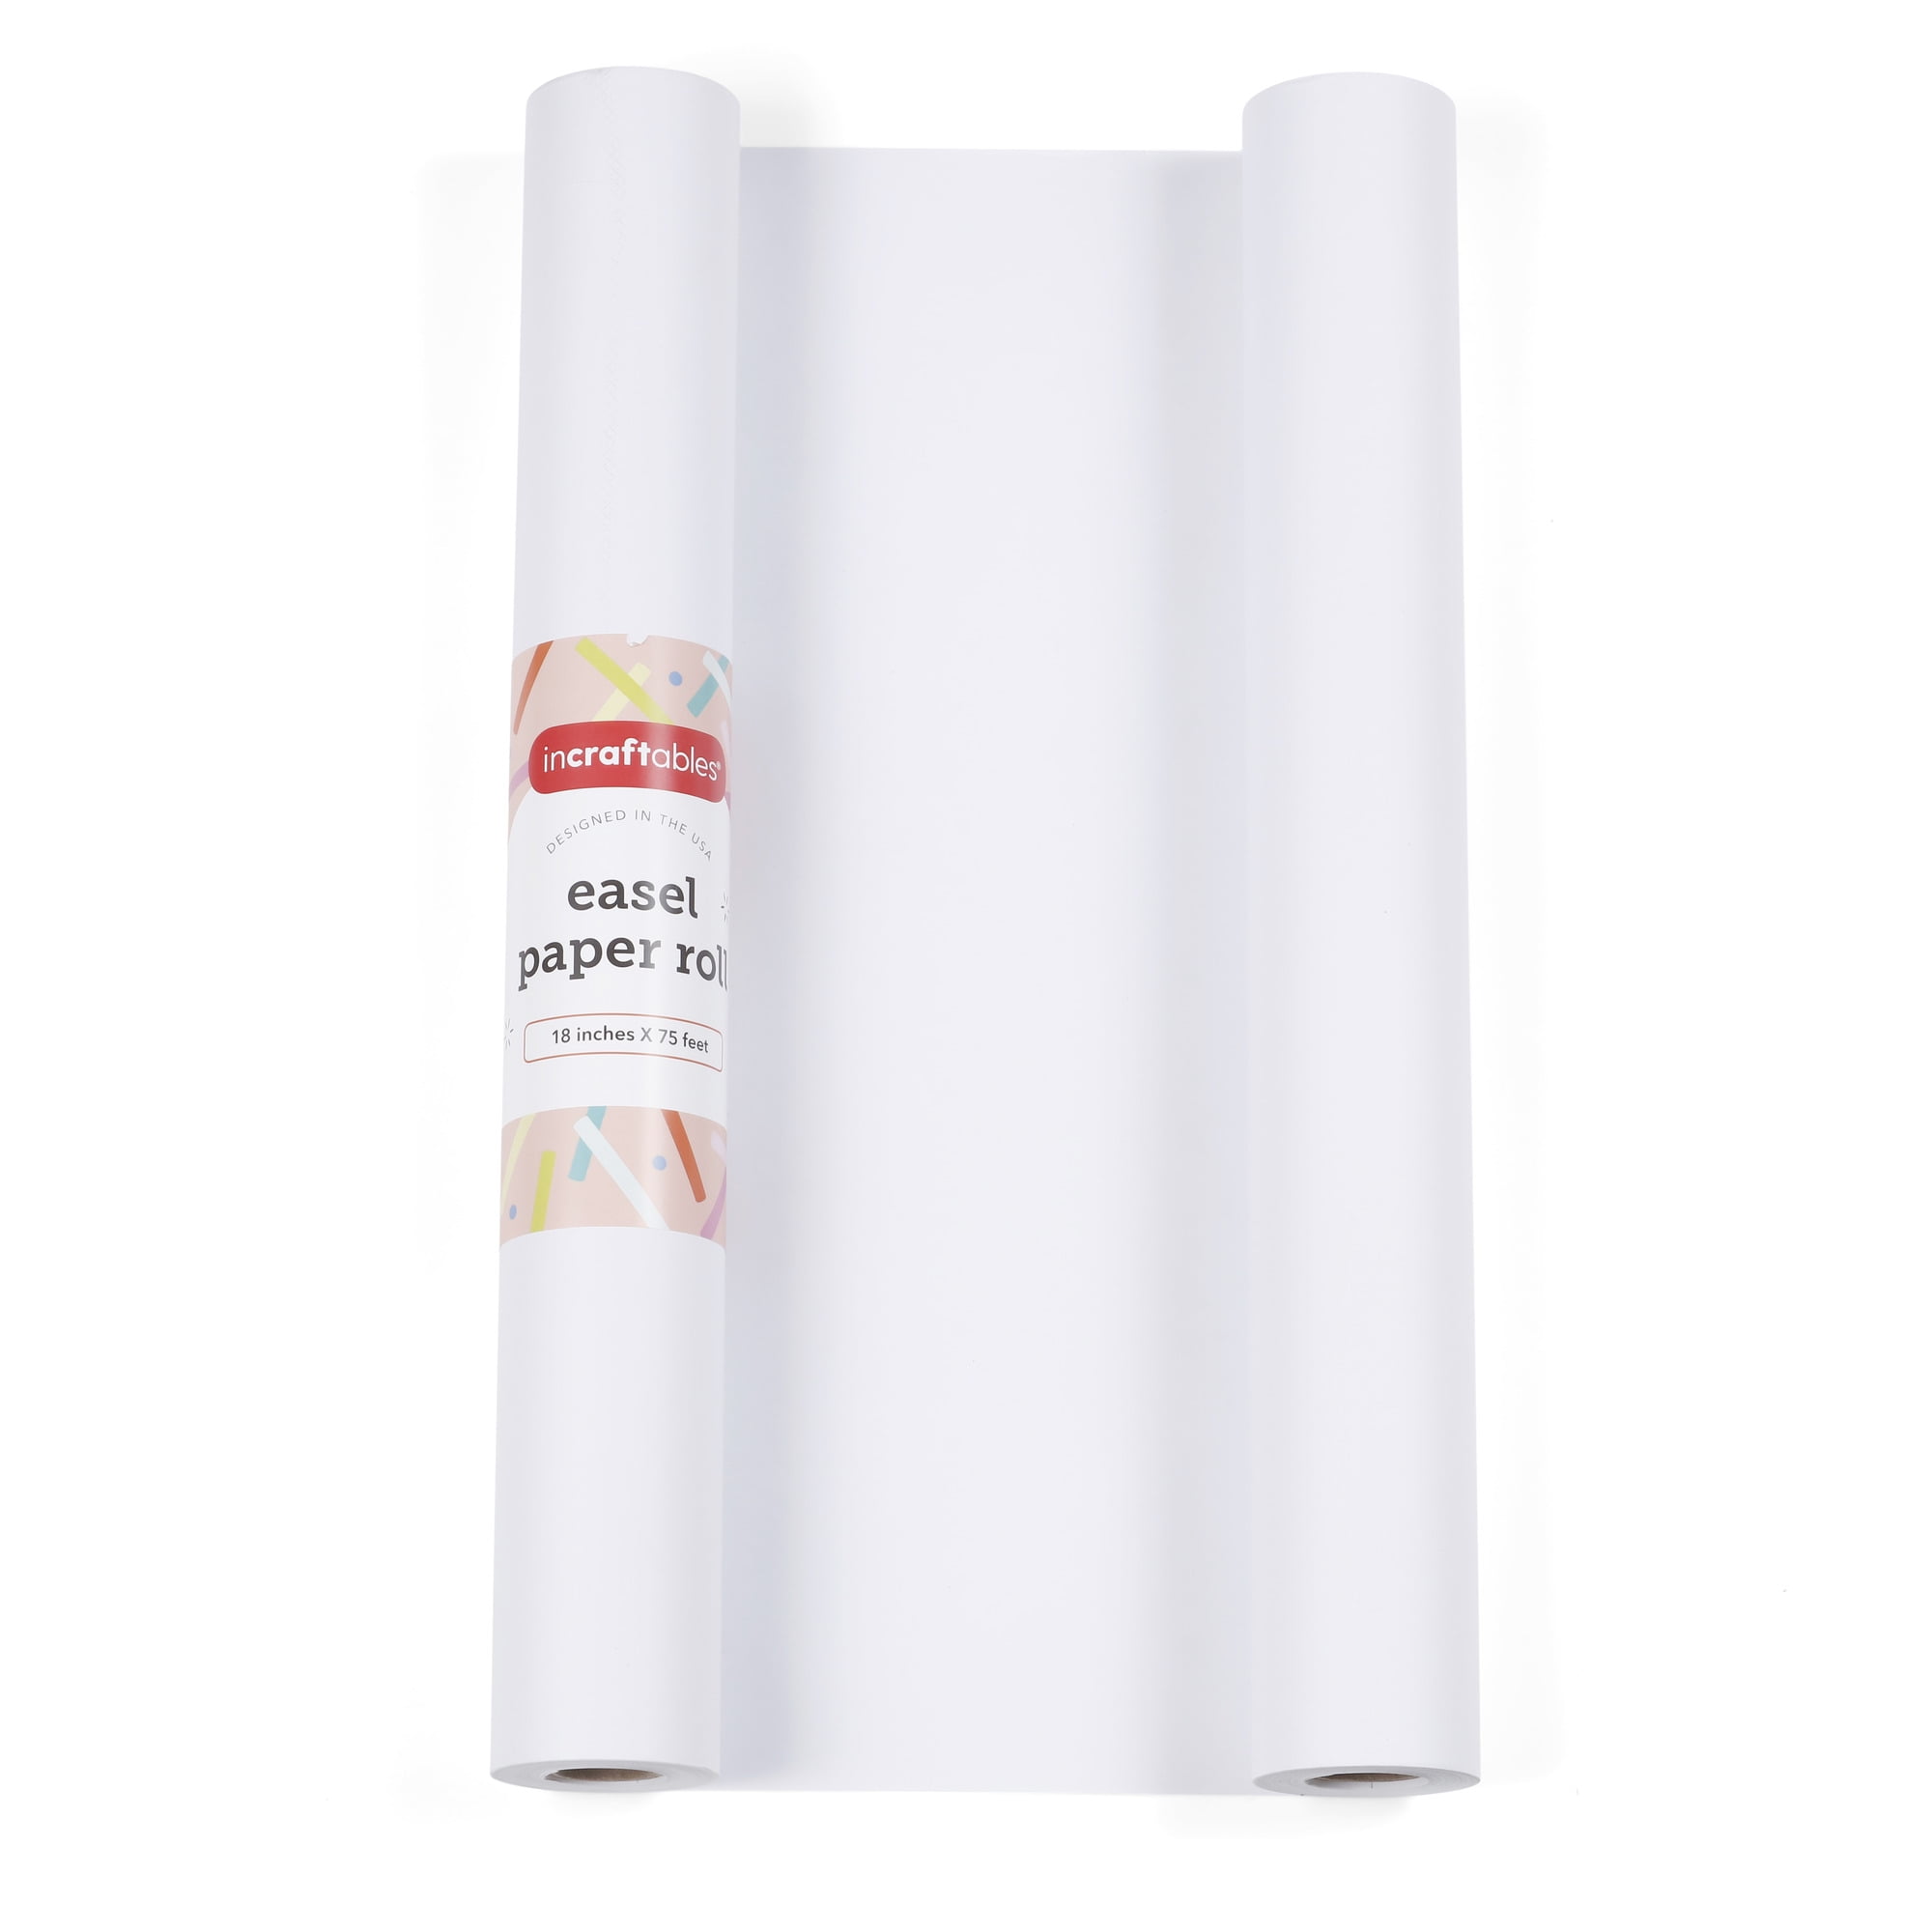 Easel White Butcher Paper Roll for Crafting Activity 3 Pack (17x